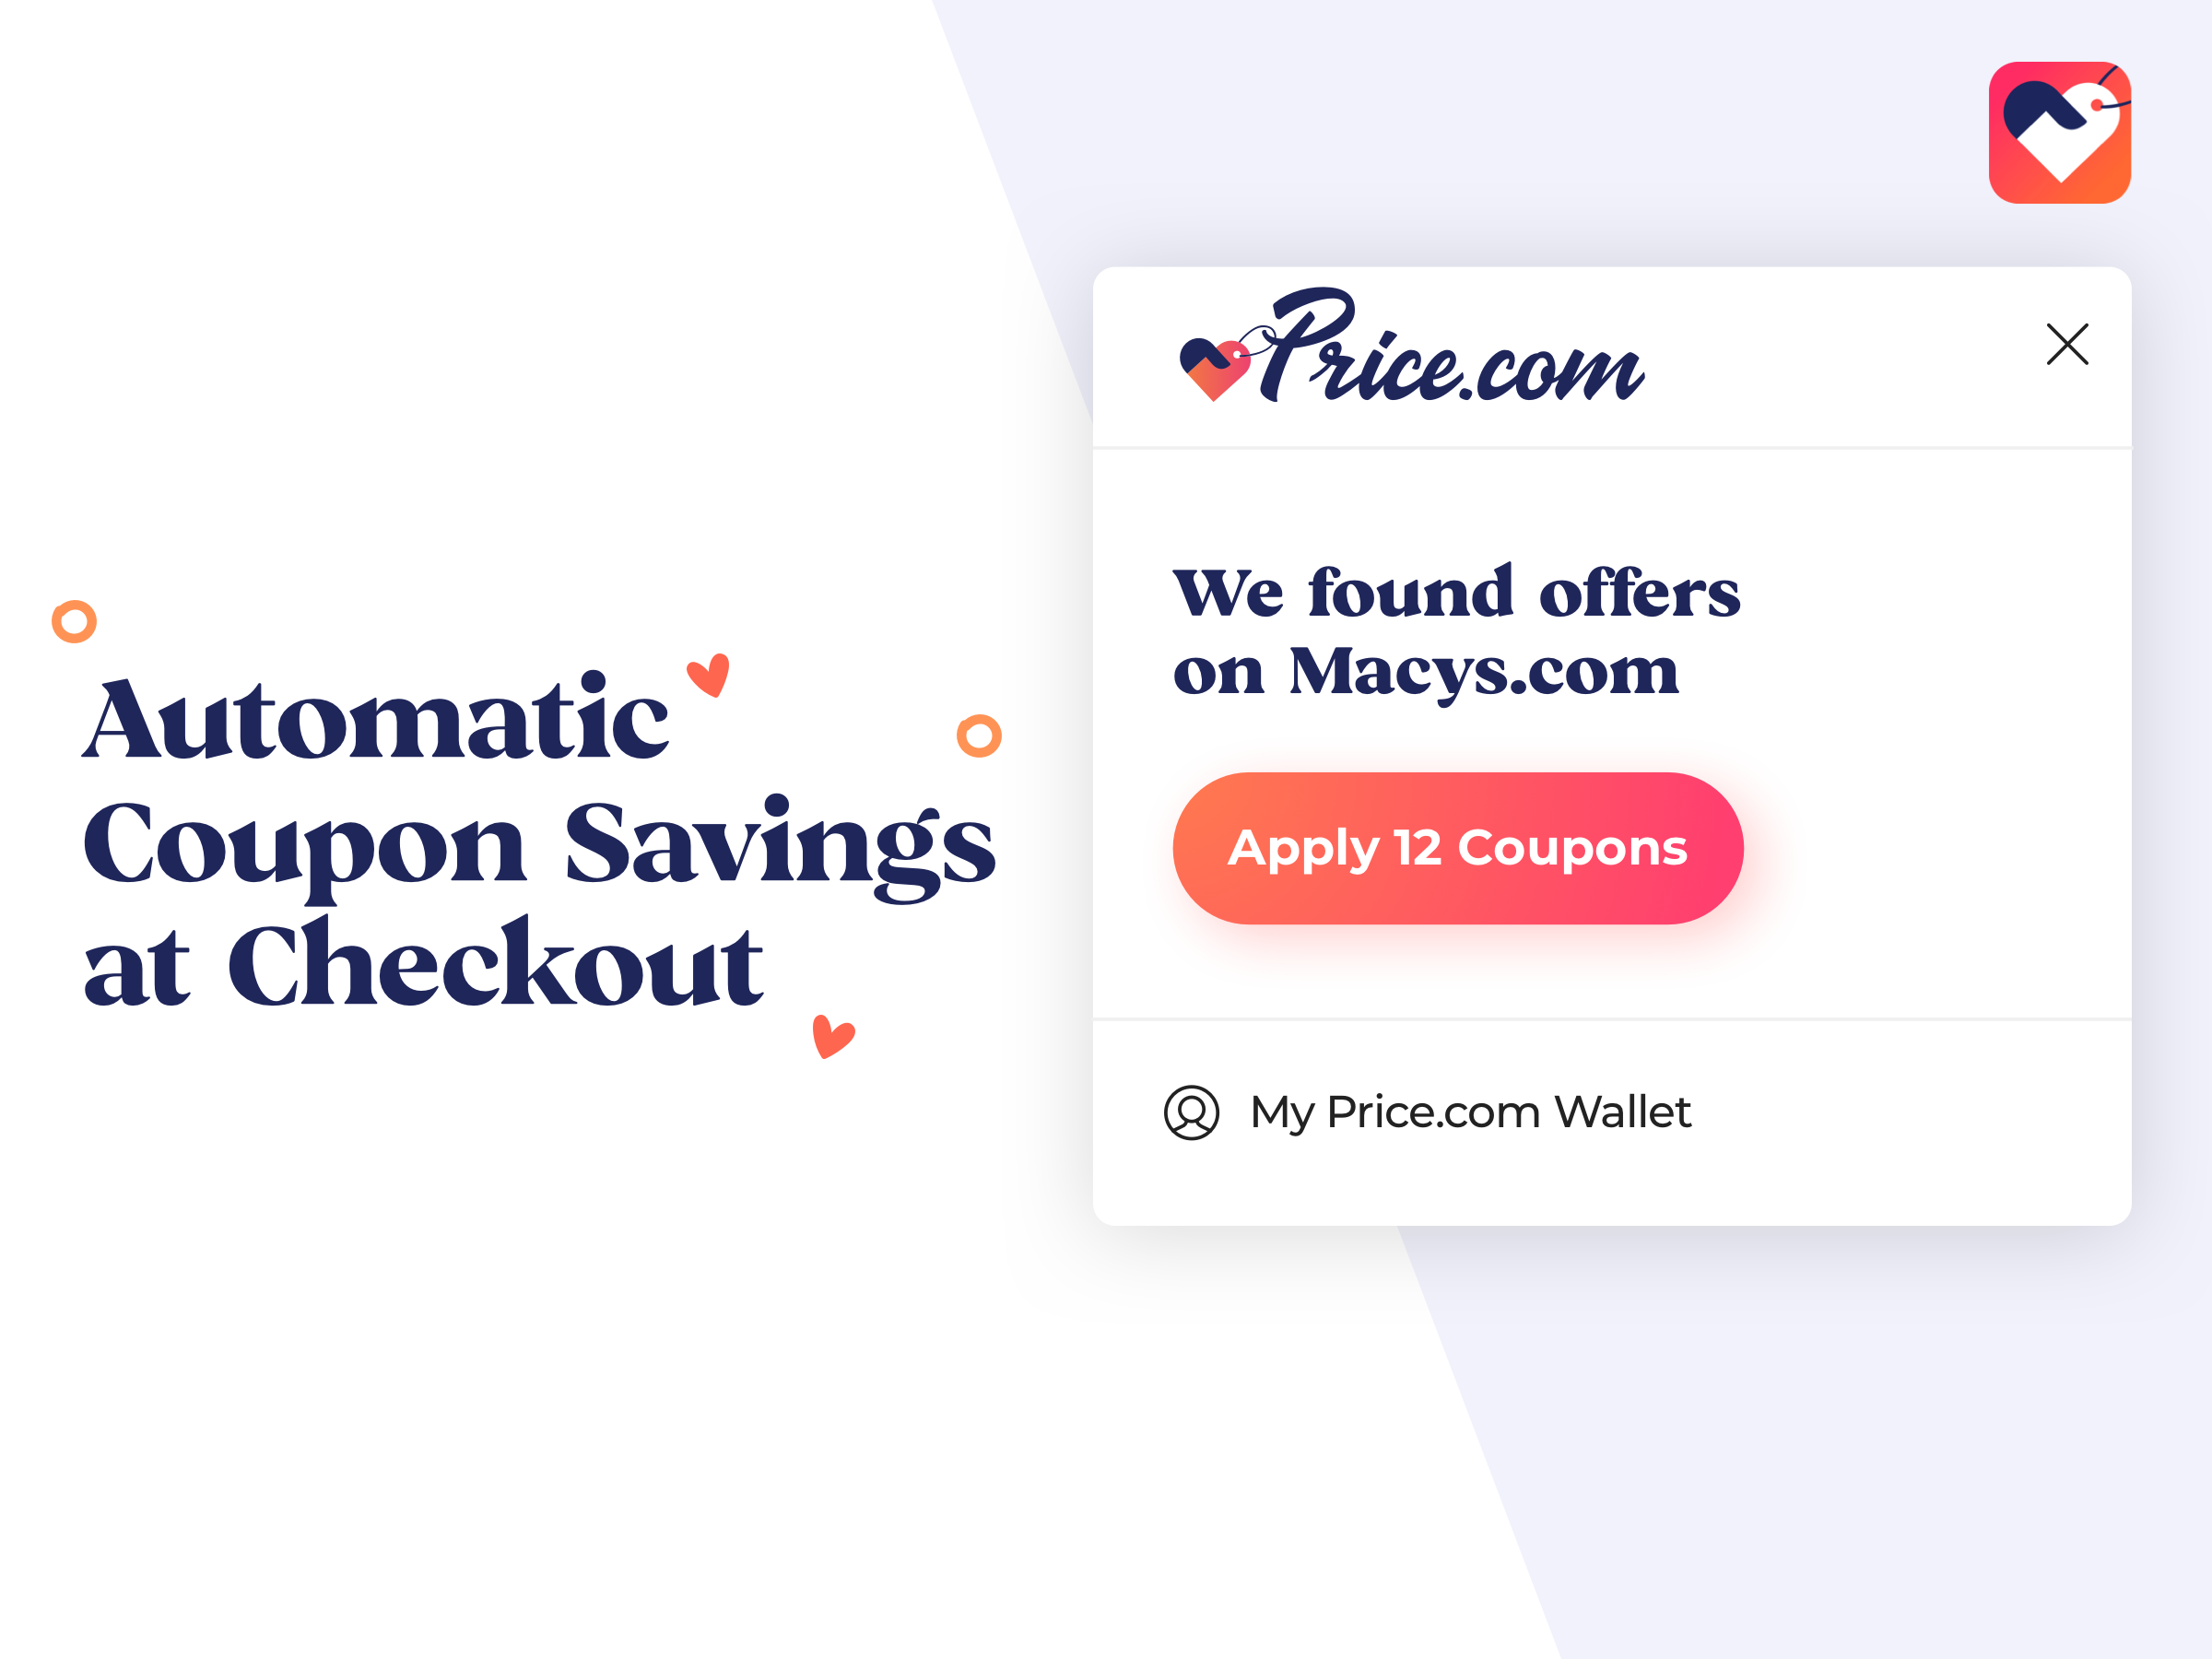 Price.com: Best Prices, Cash Back & Coupons